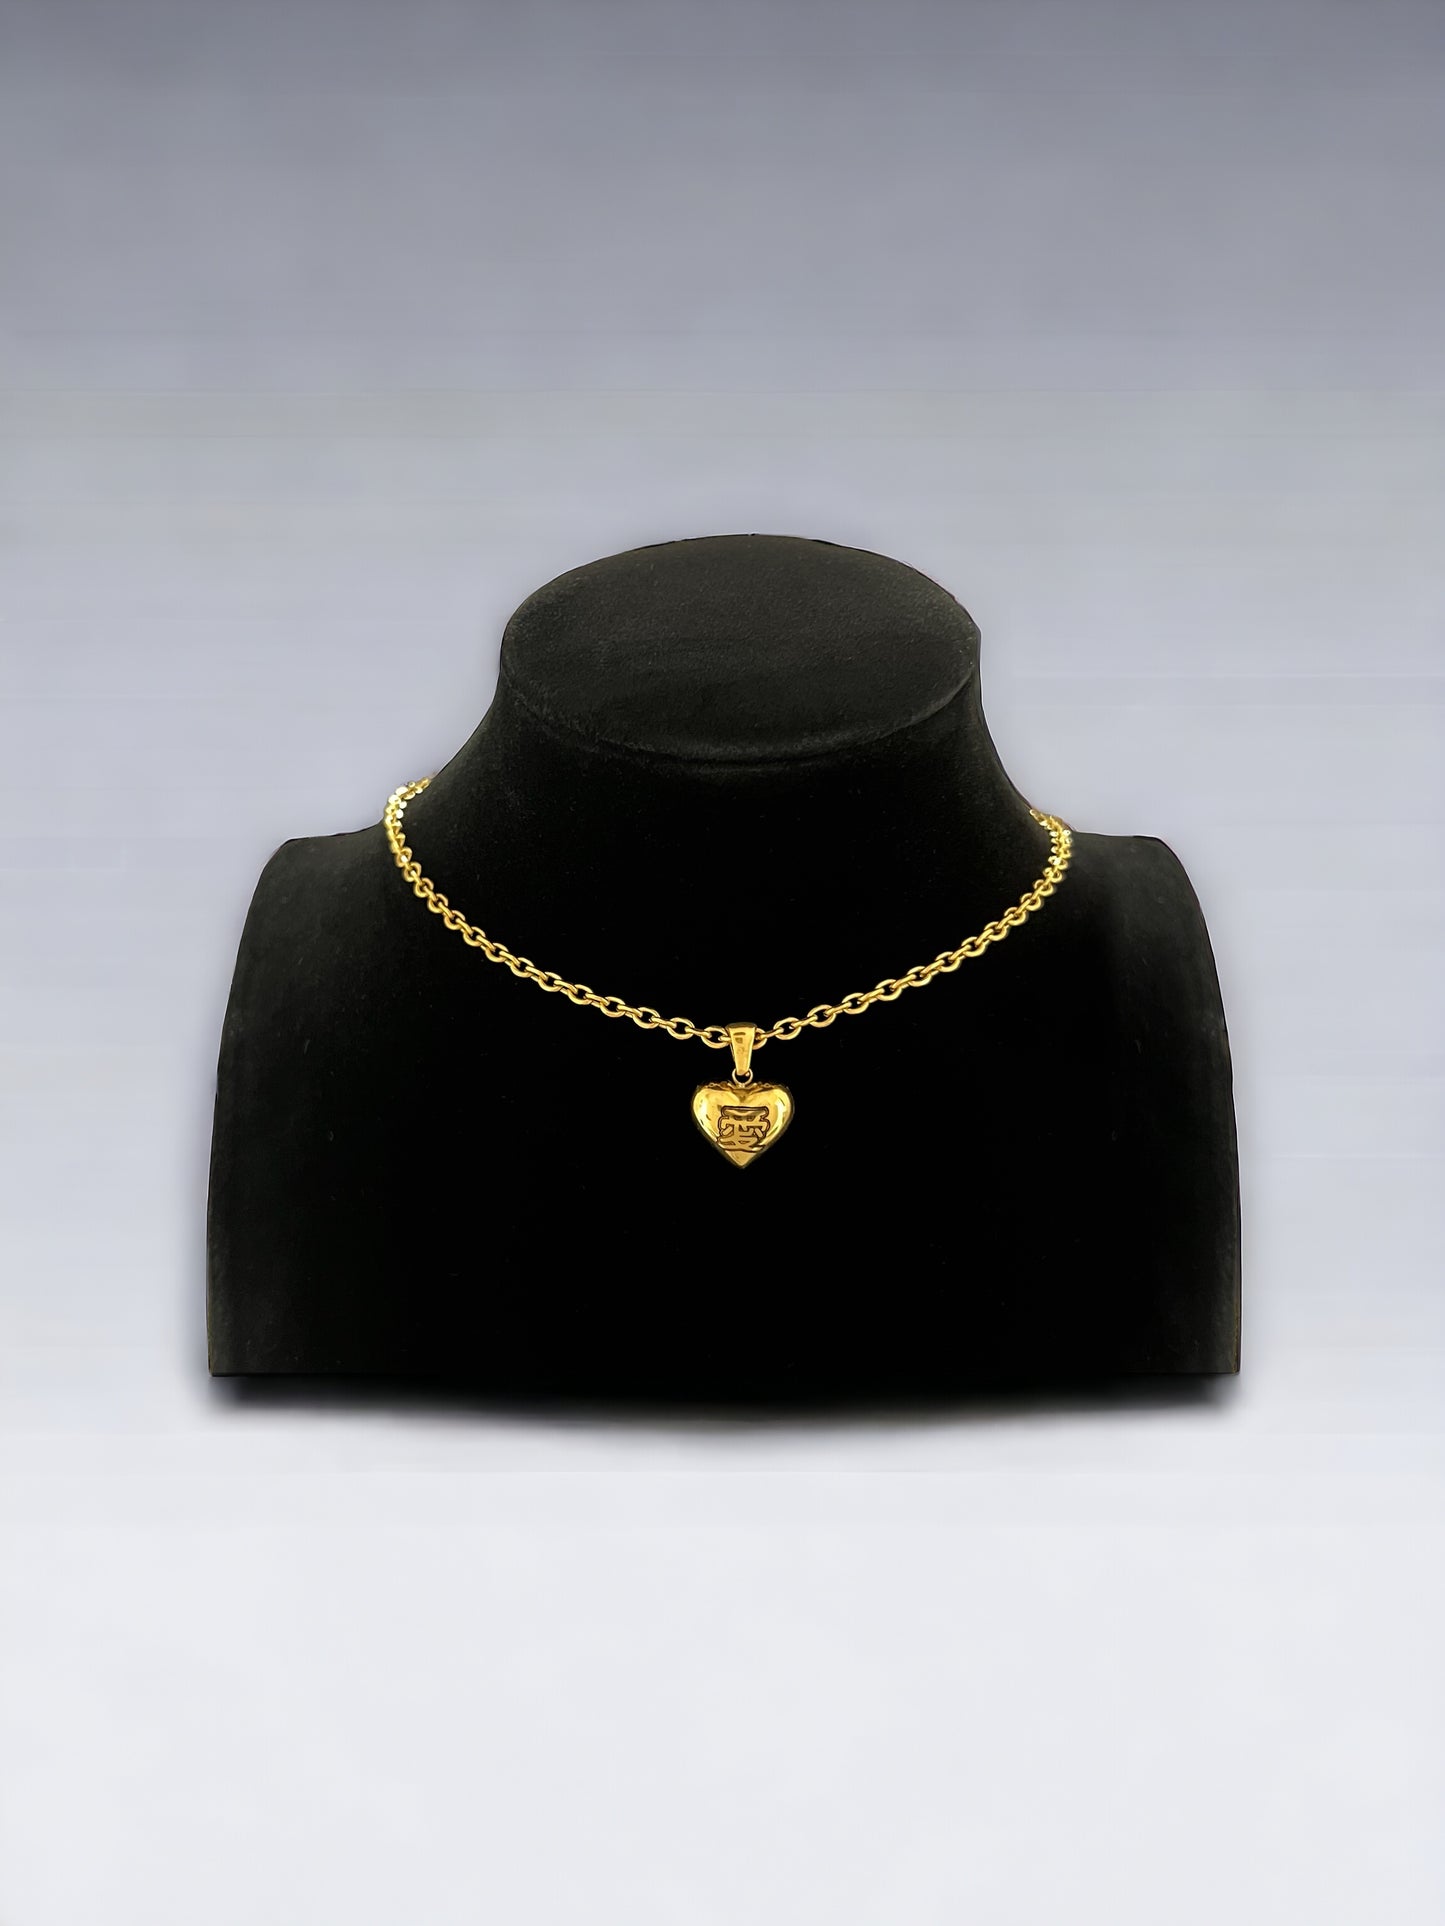 Fat love symbol Heart necklace Gold